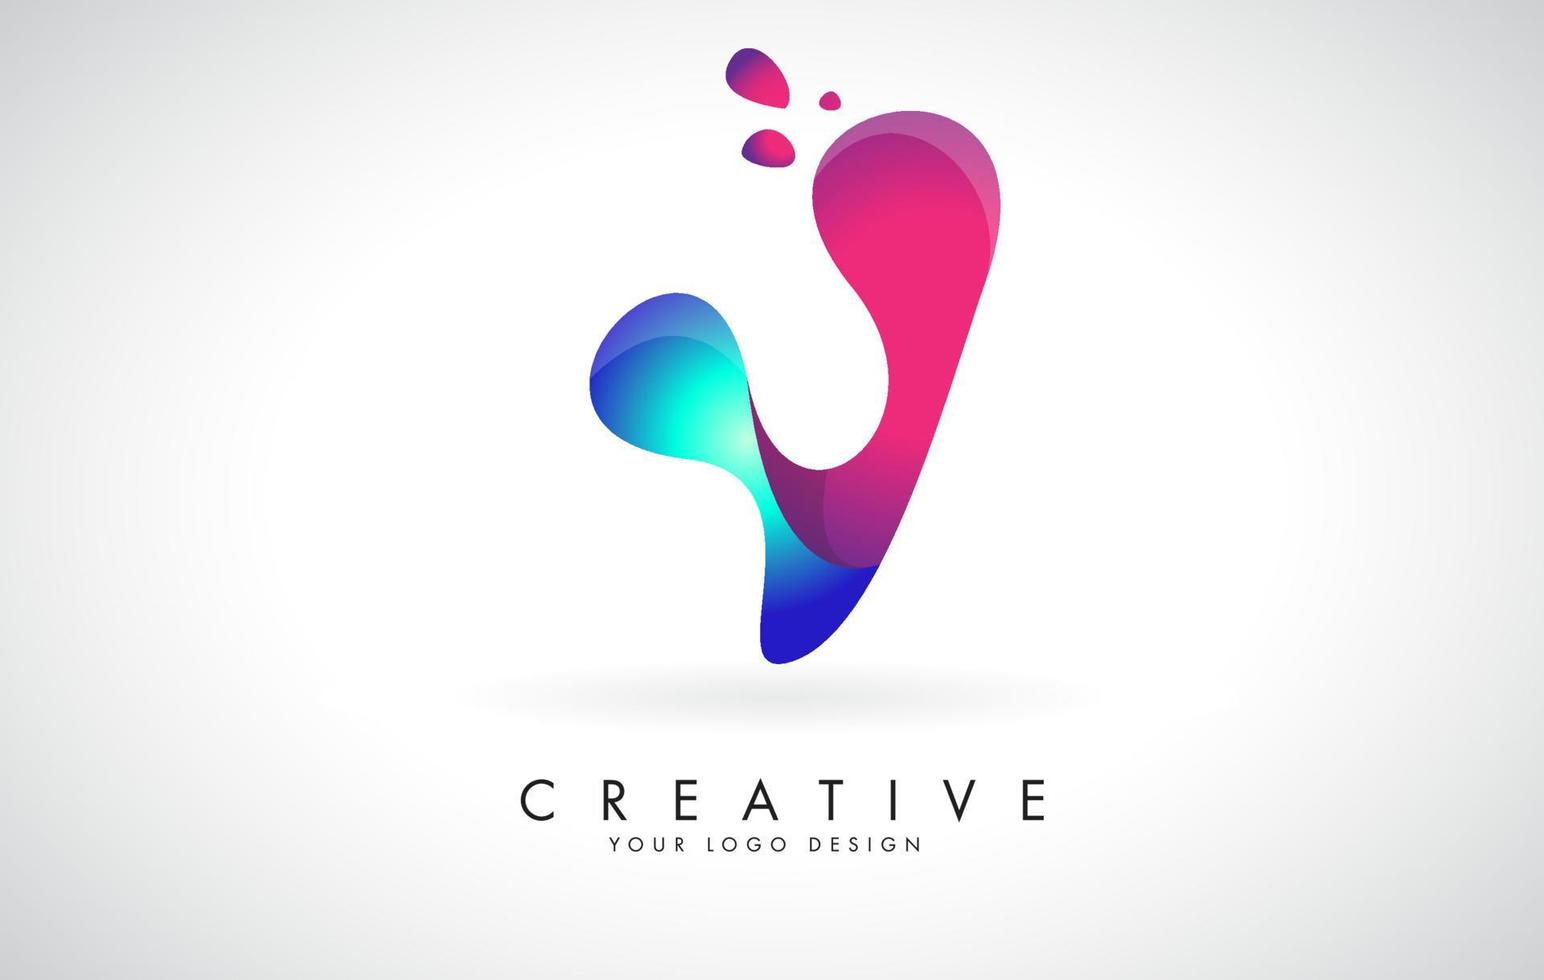 Blue and Pink creative letter V Logo Design with Dots. Friendly Corporate Entertainment, Media, Technology, Digital Business vector design with drops.